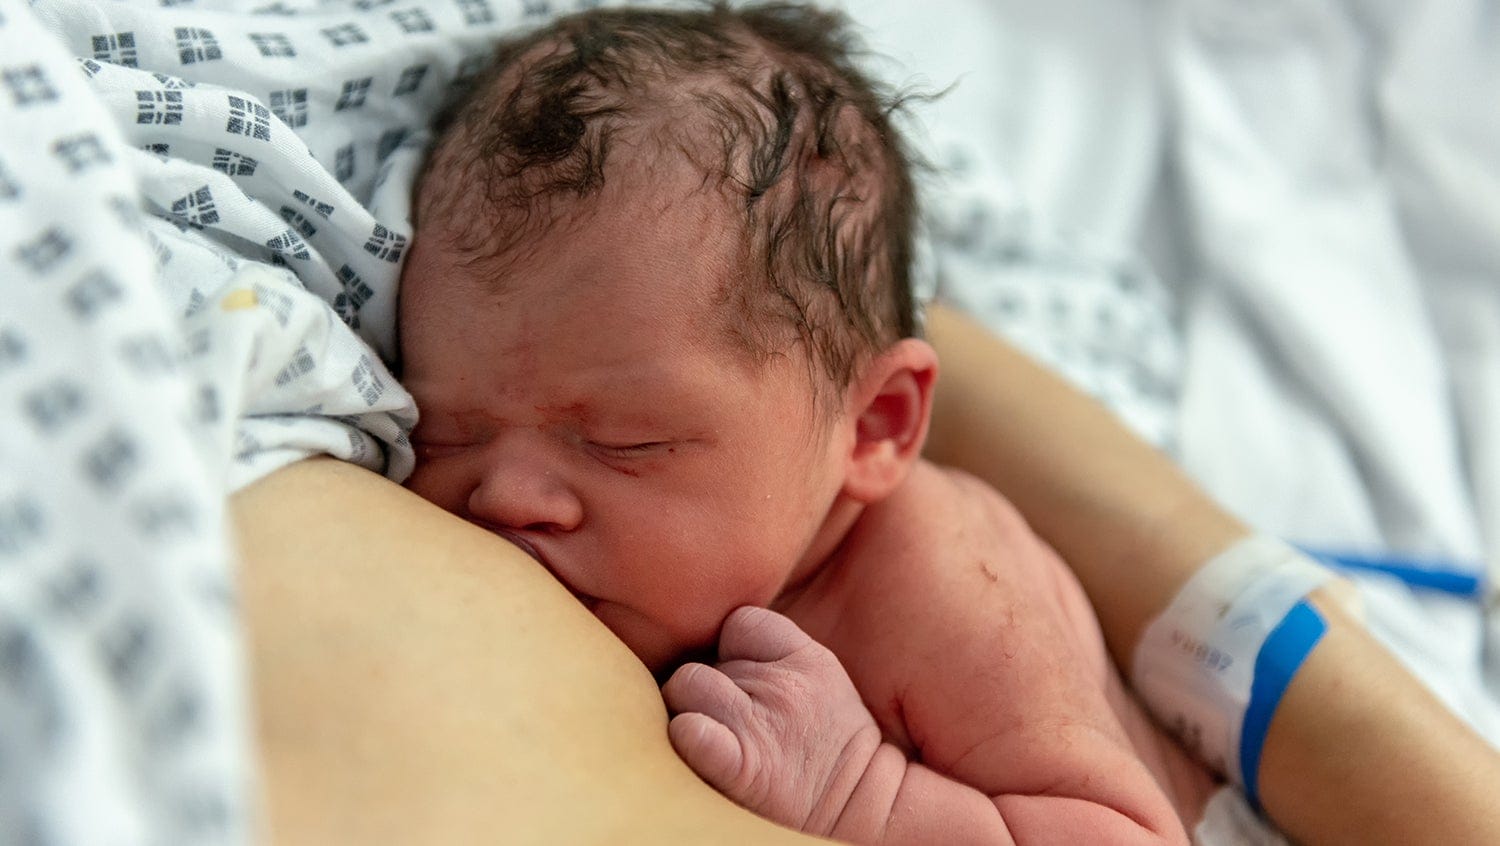 A newborn baby is breastfeeding during rooming-in with mom at the hospital